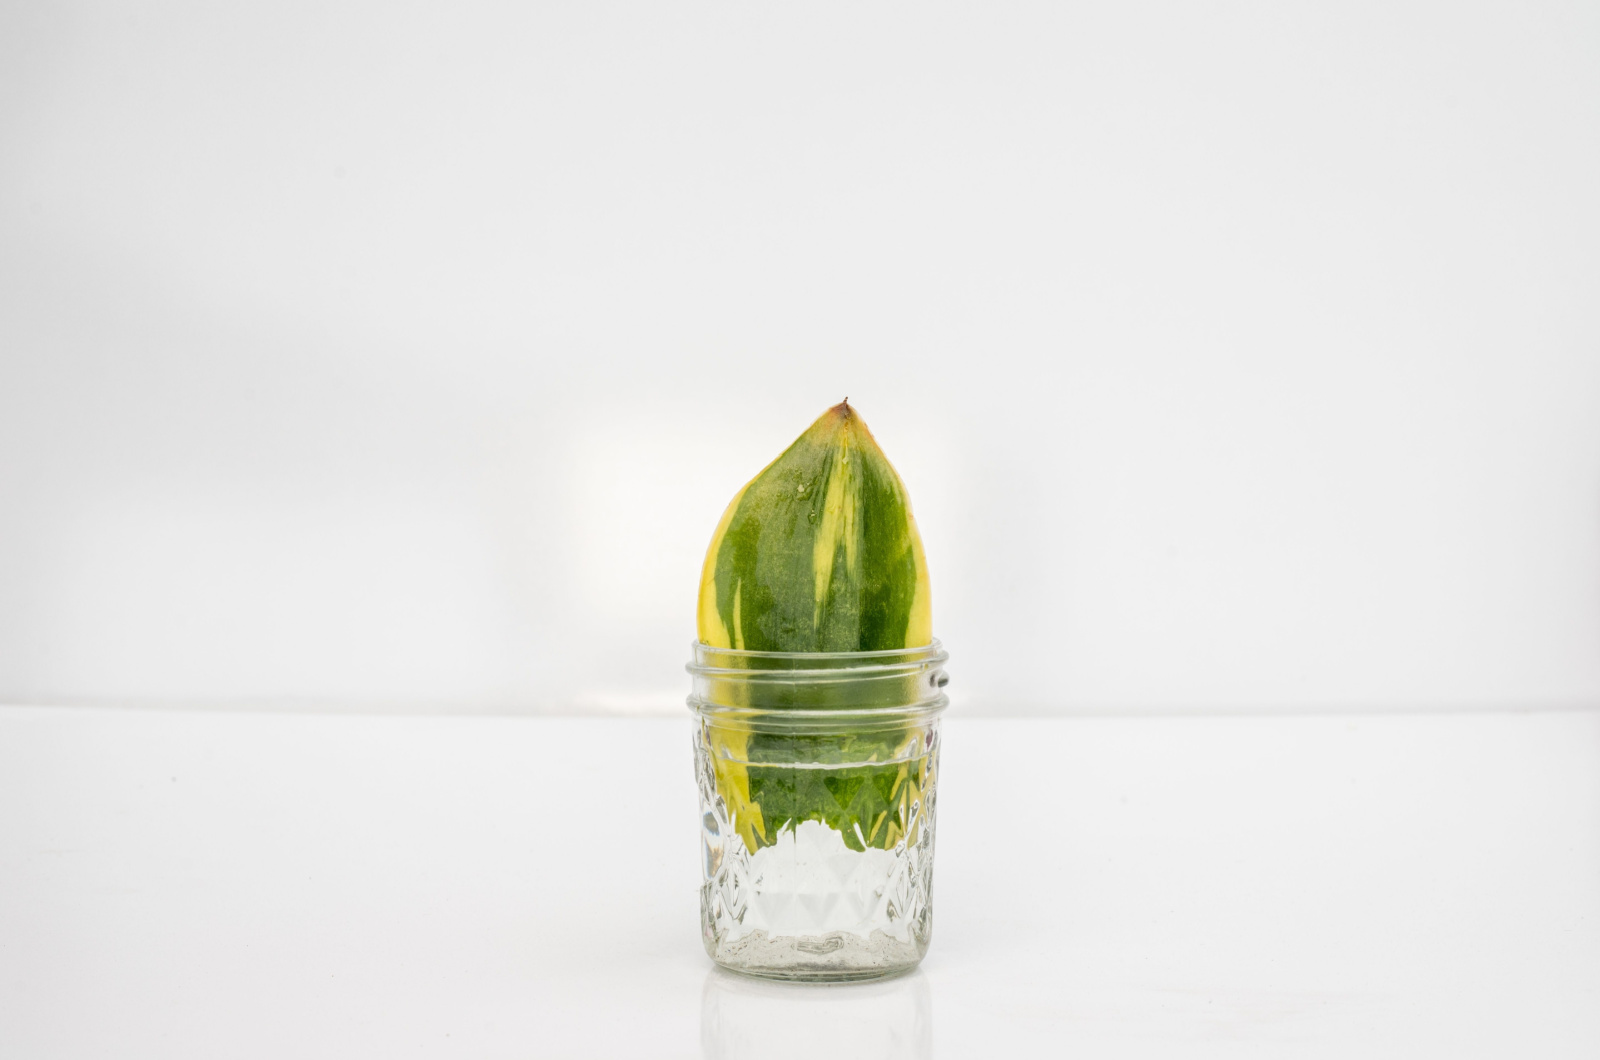 snake plant growing in glass